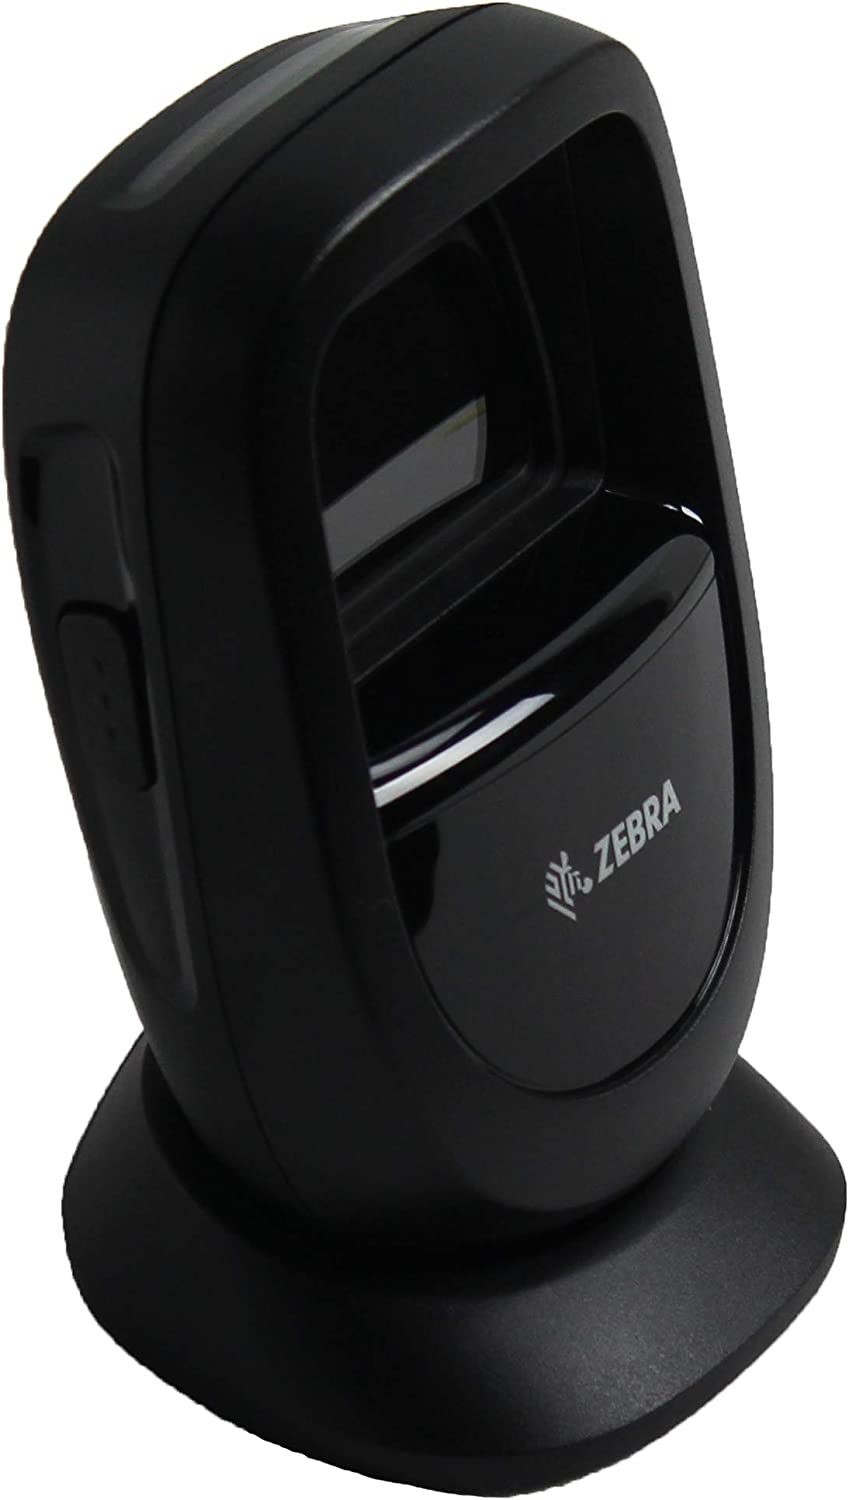 Primary image for Usb-Connected Zebra Ds9308 Handheld Scanner (Sr00004Zzww).